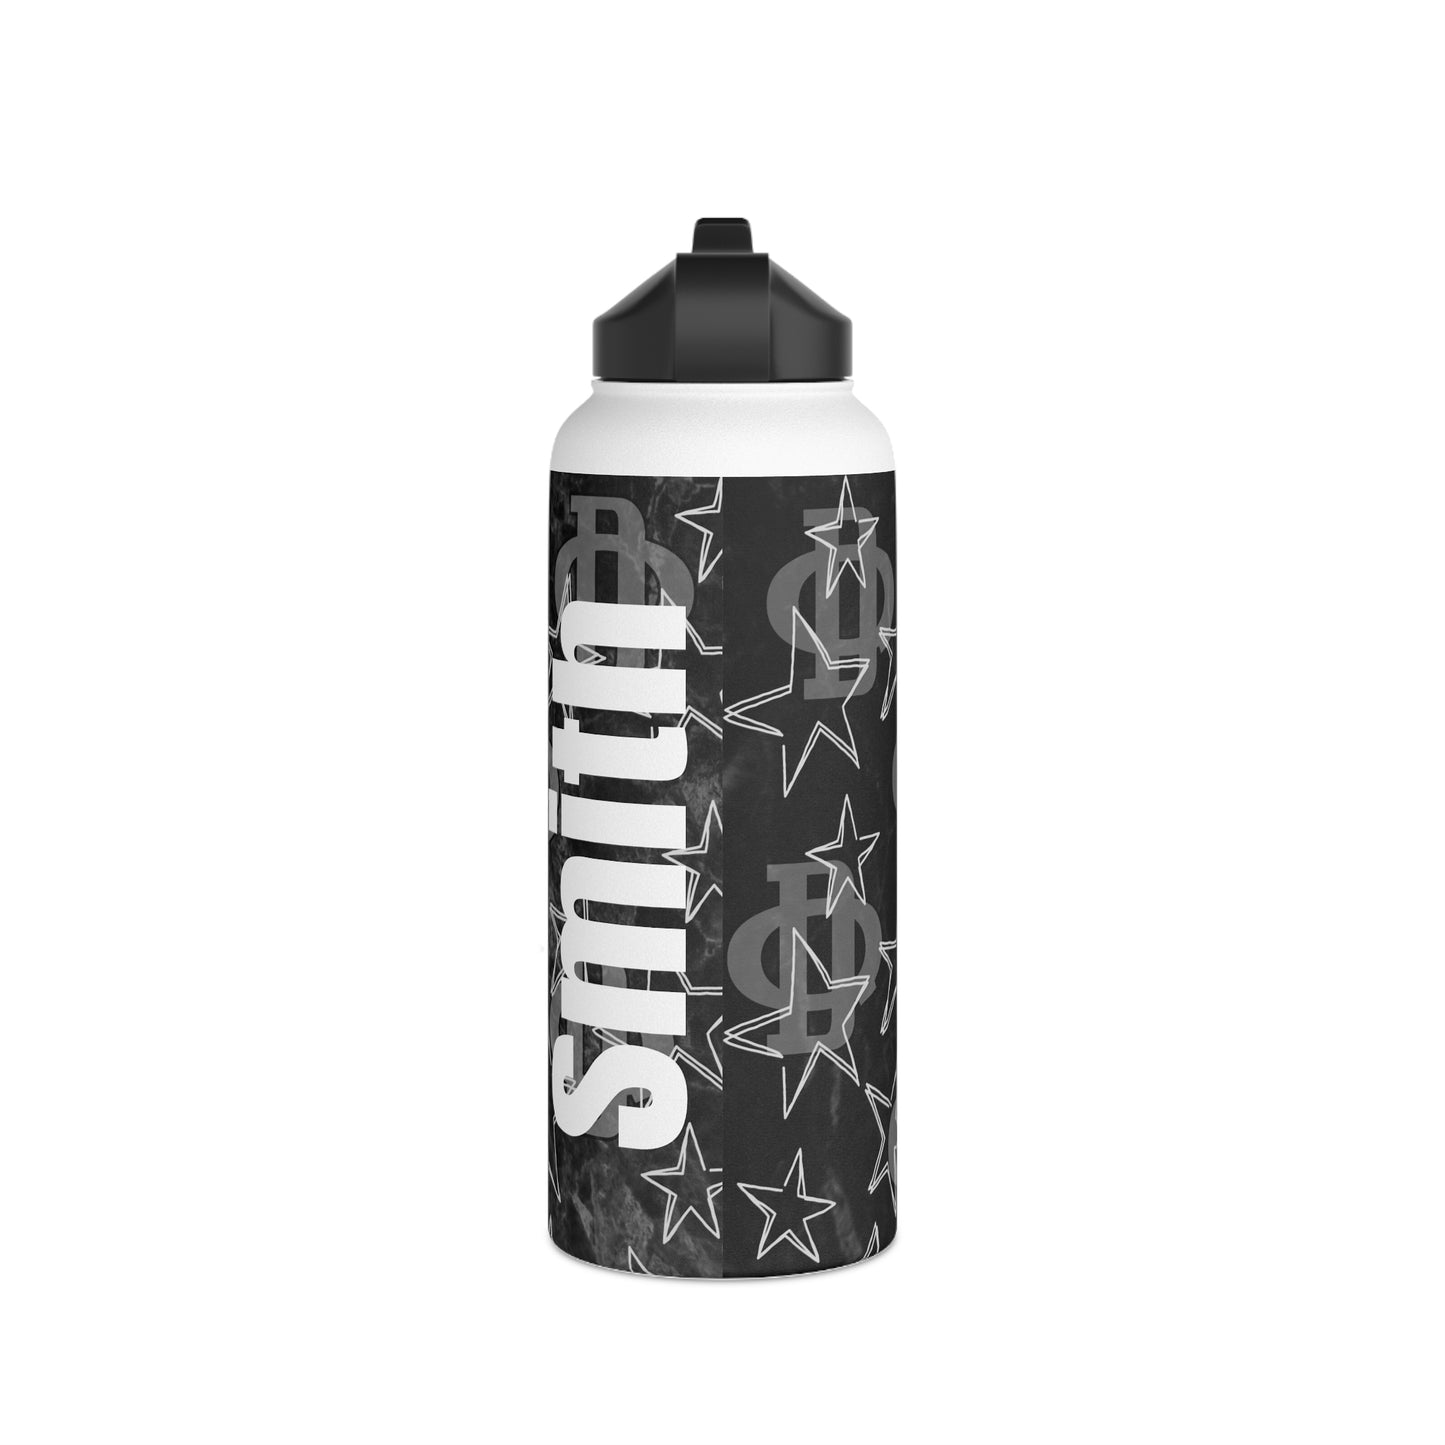 DuQuoin Indians Stainless Steel Water Bottle